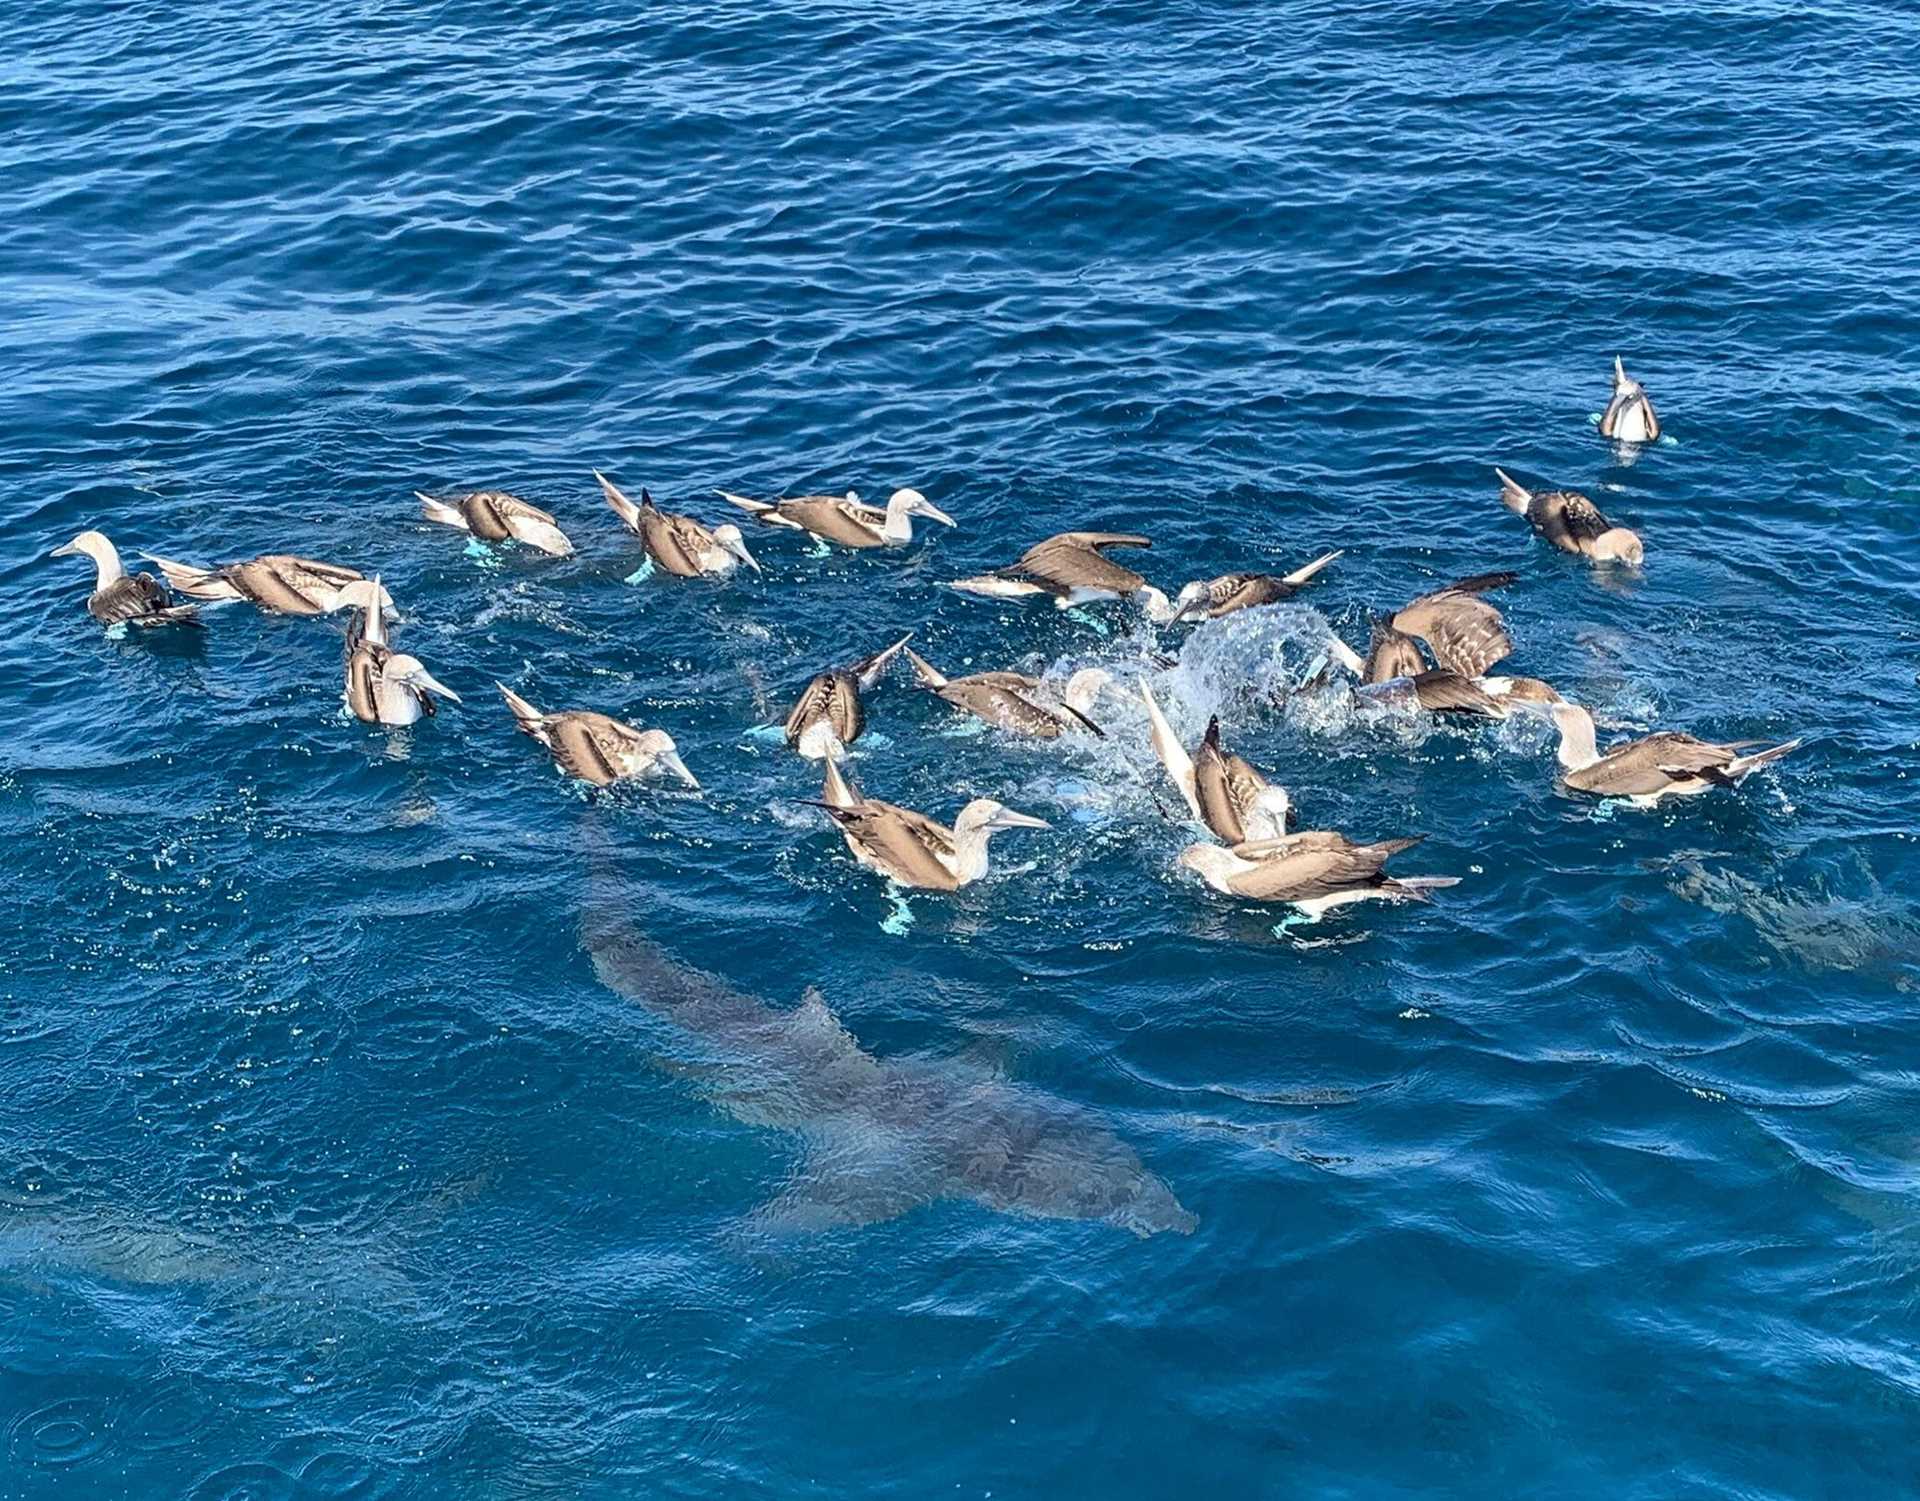 dozens of blue-footed boobies on top of water, with shark visible underneath water